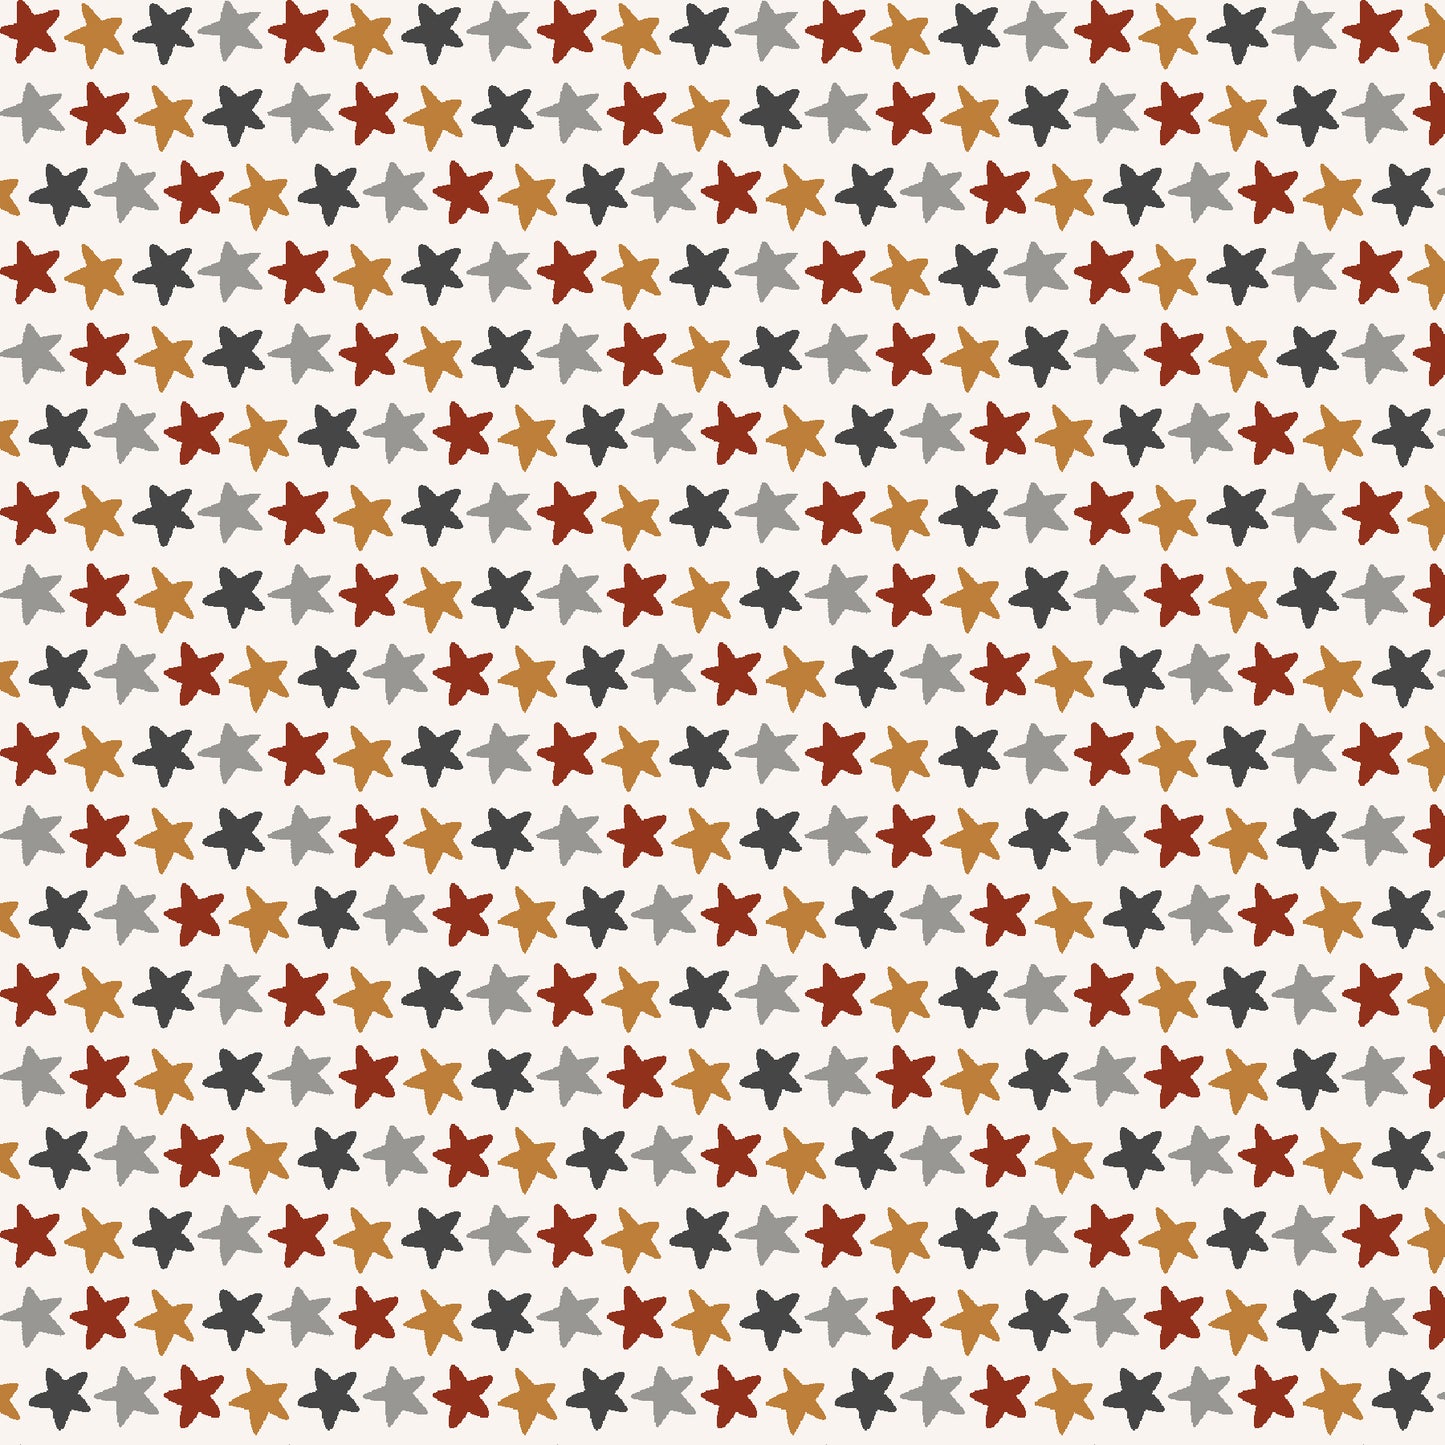 Water Babies by Sugarly Designs Tossed Stars Ivory    6690-39 Cotton Woven Fabric